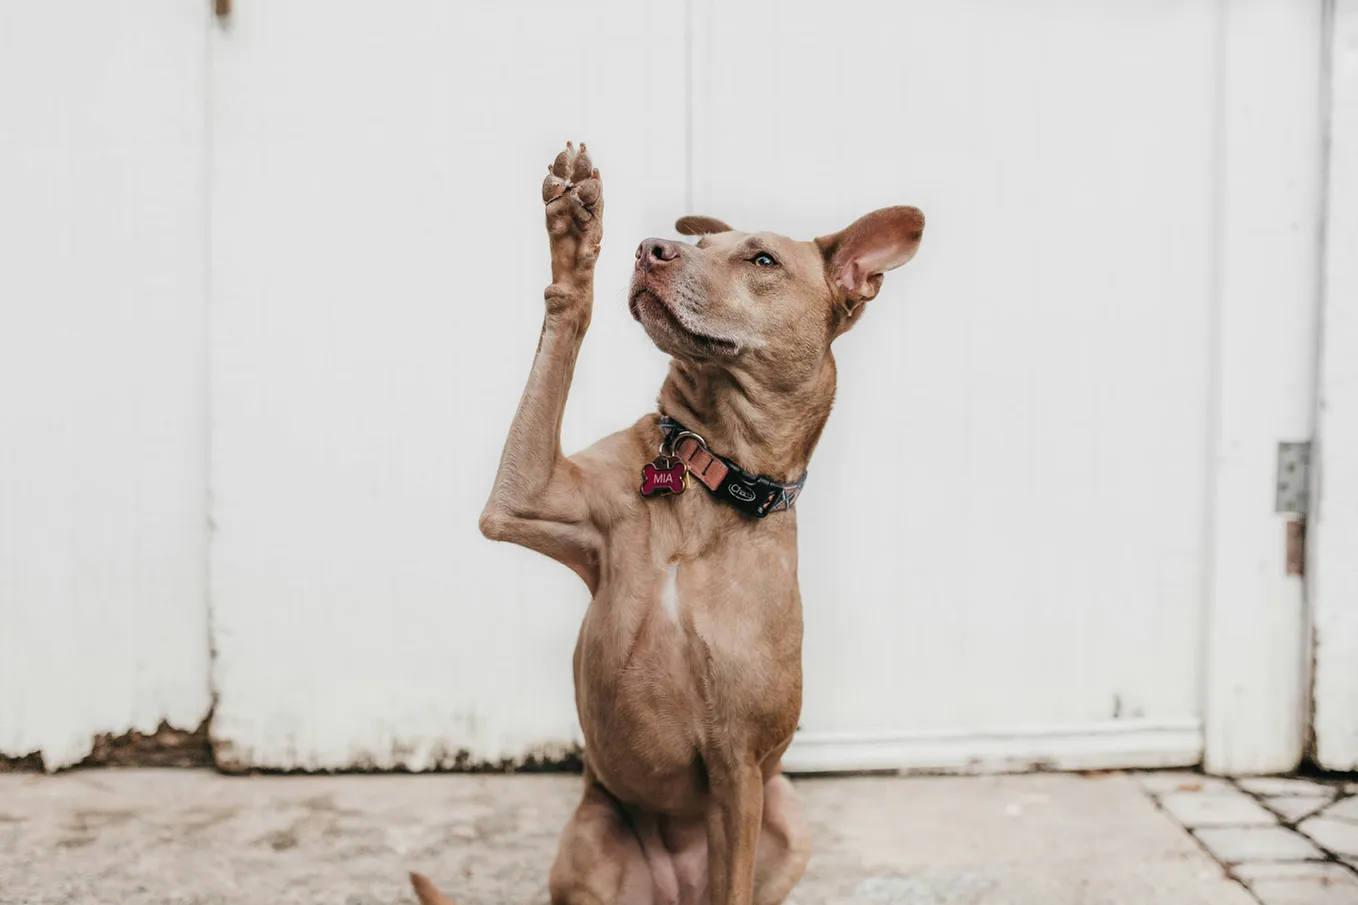 Dog raising a paw as if to ask a question.